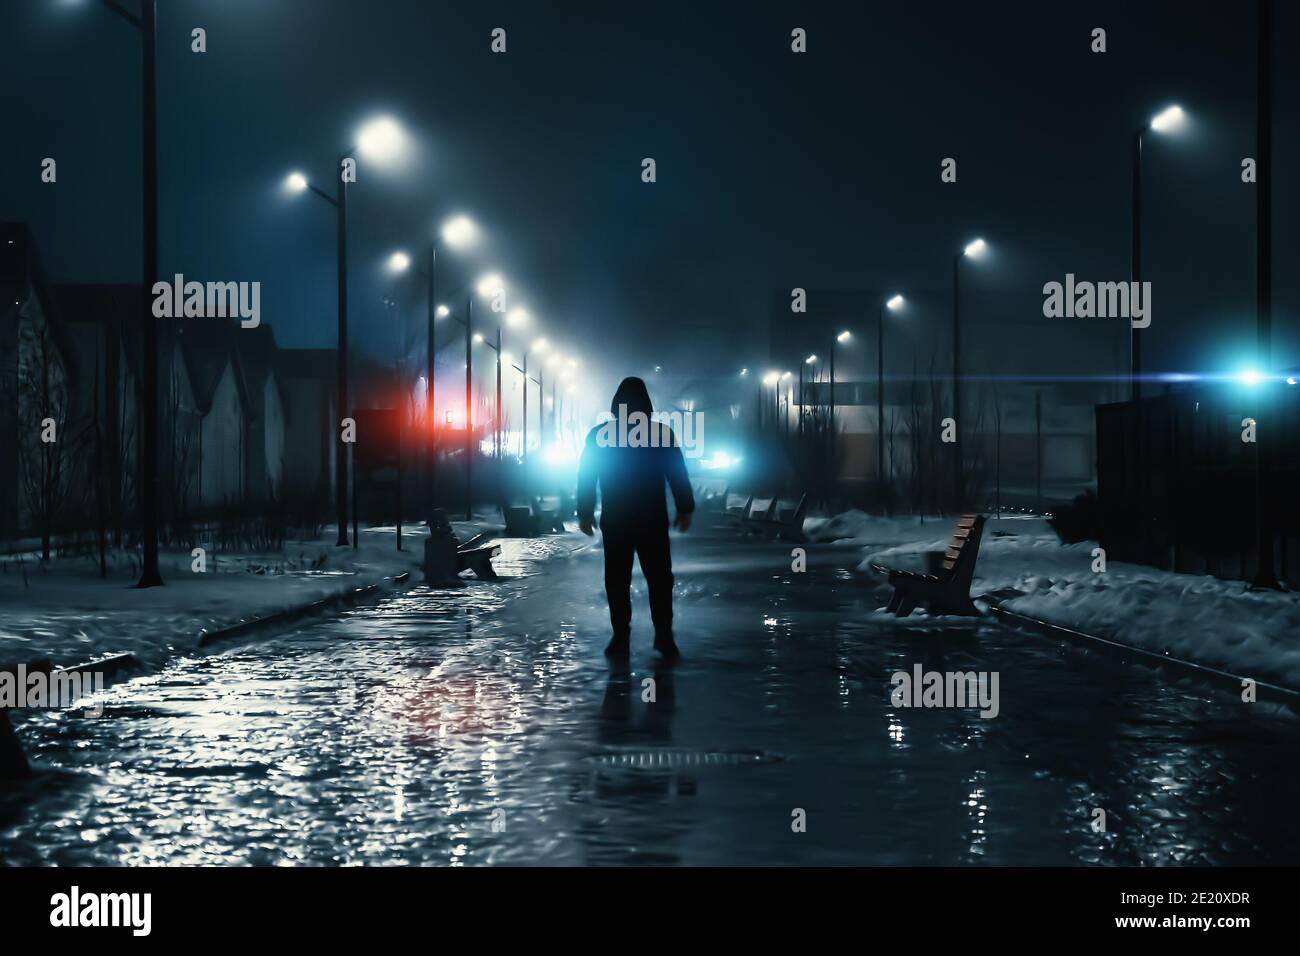 Man silhouette in misty alley at night city park, mystery and horror foggy cityscape atmosphere, alone stalker or crime person. Stock Photo